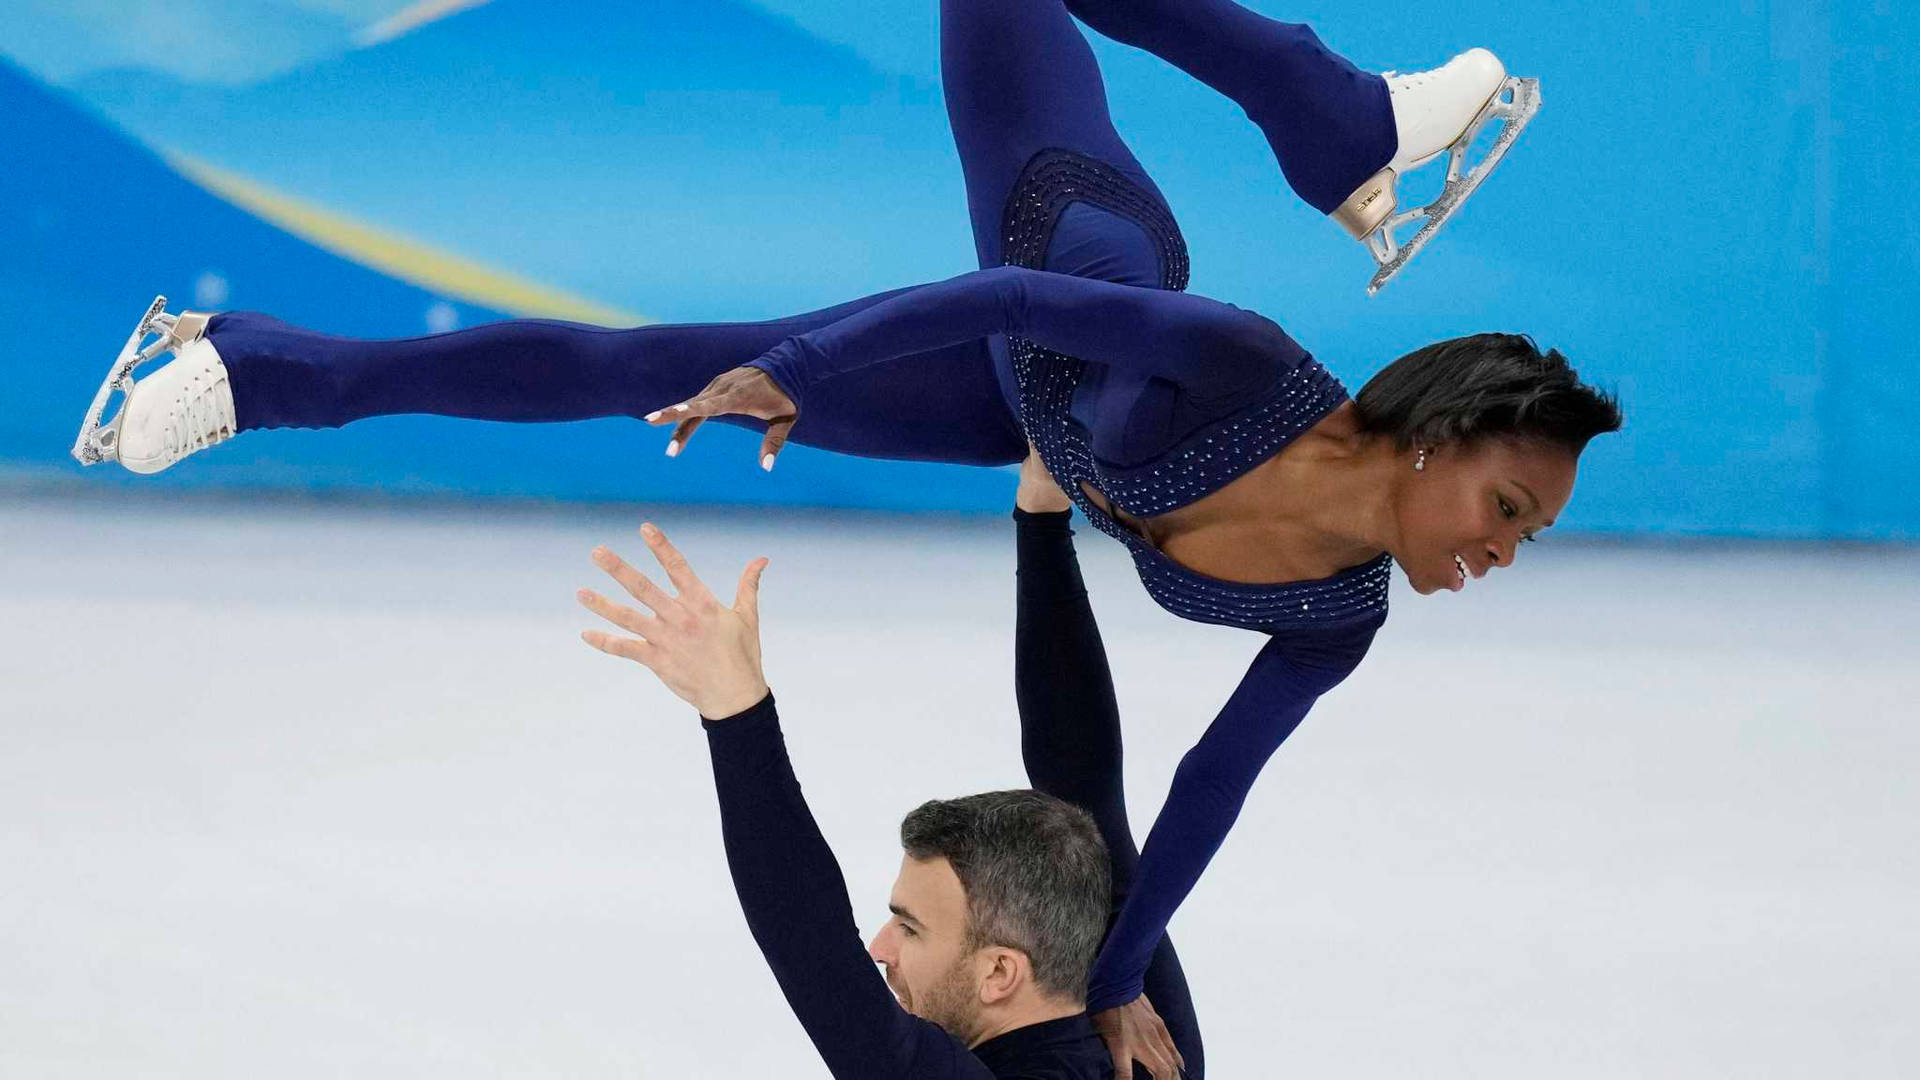 Canadian Figure Skating Pair Vanessa James and Eric Radford in Action Wallpaper